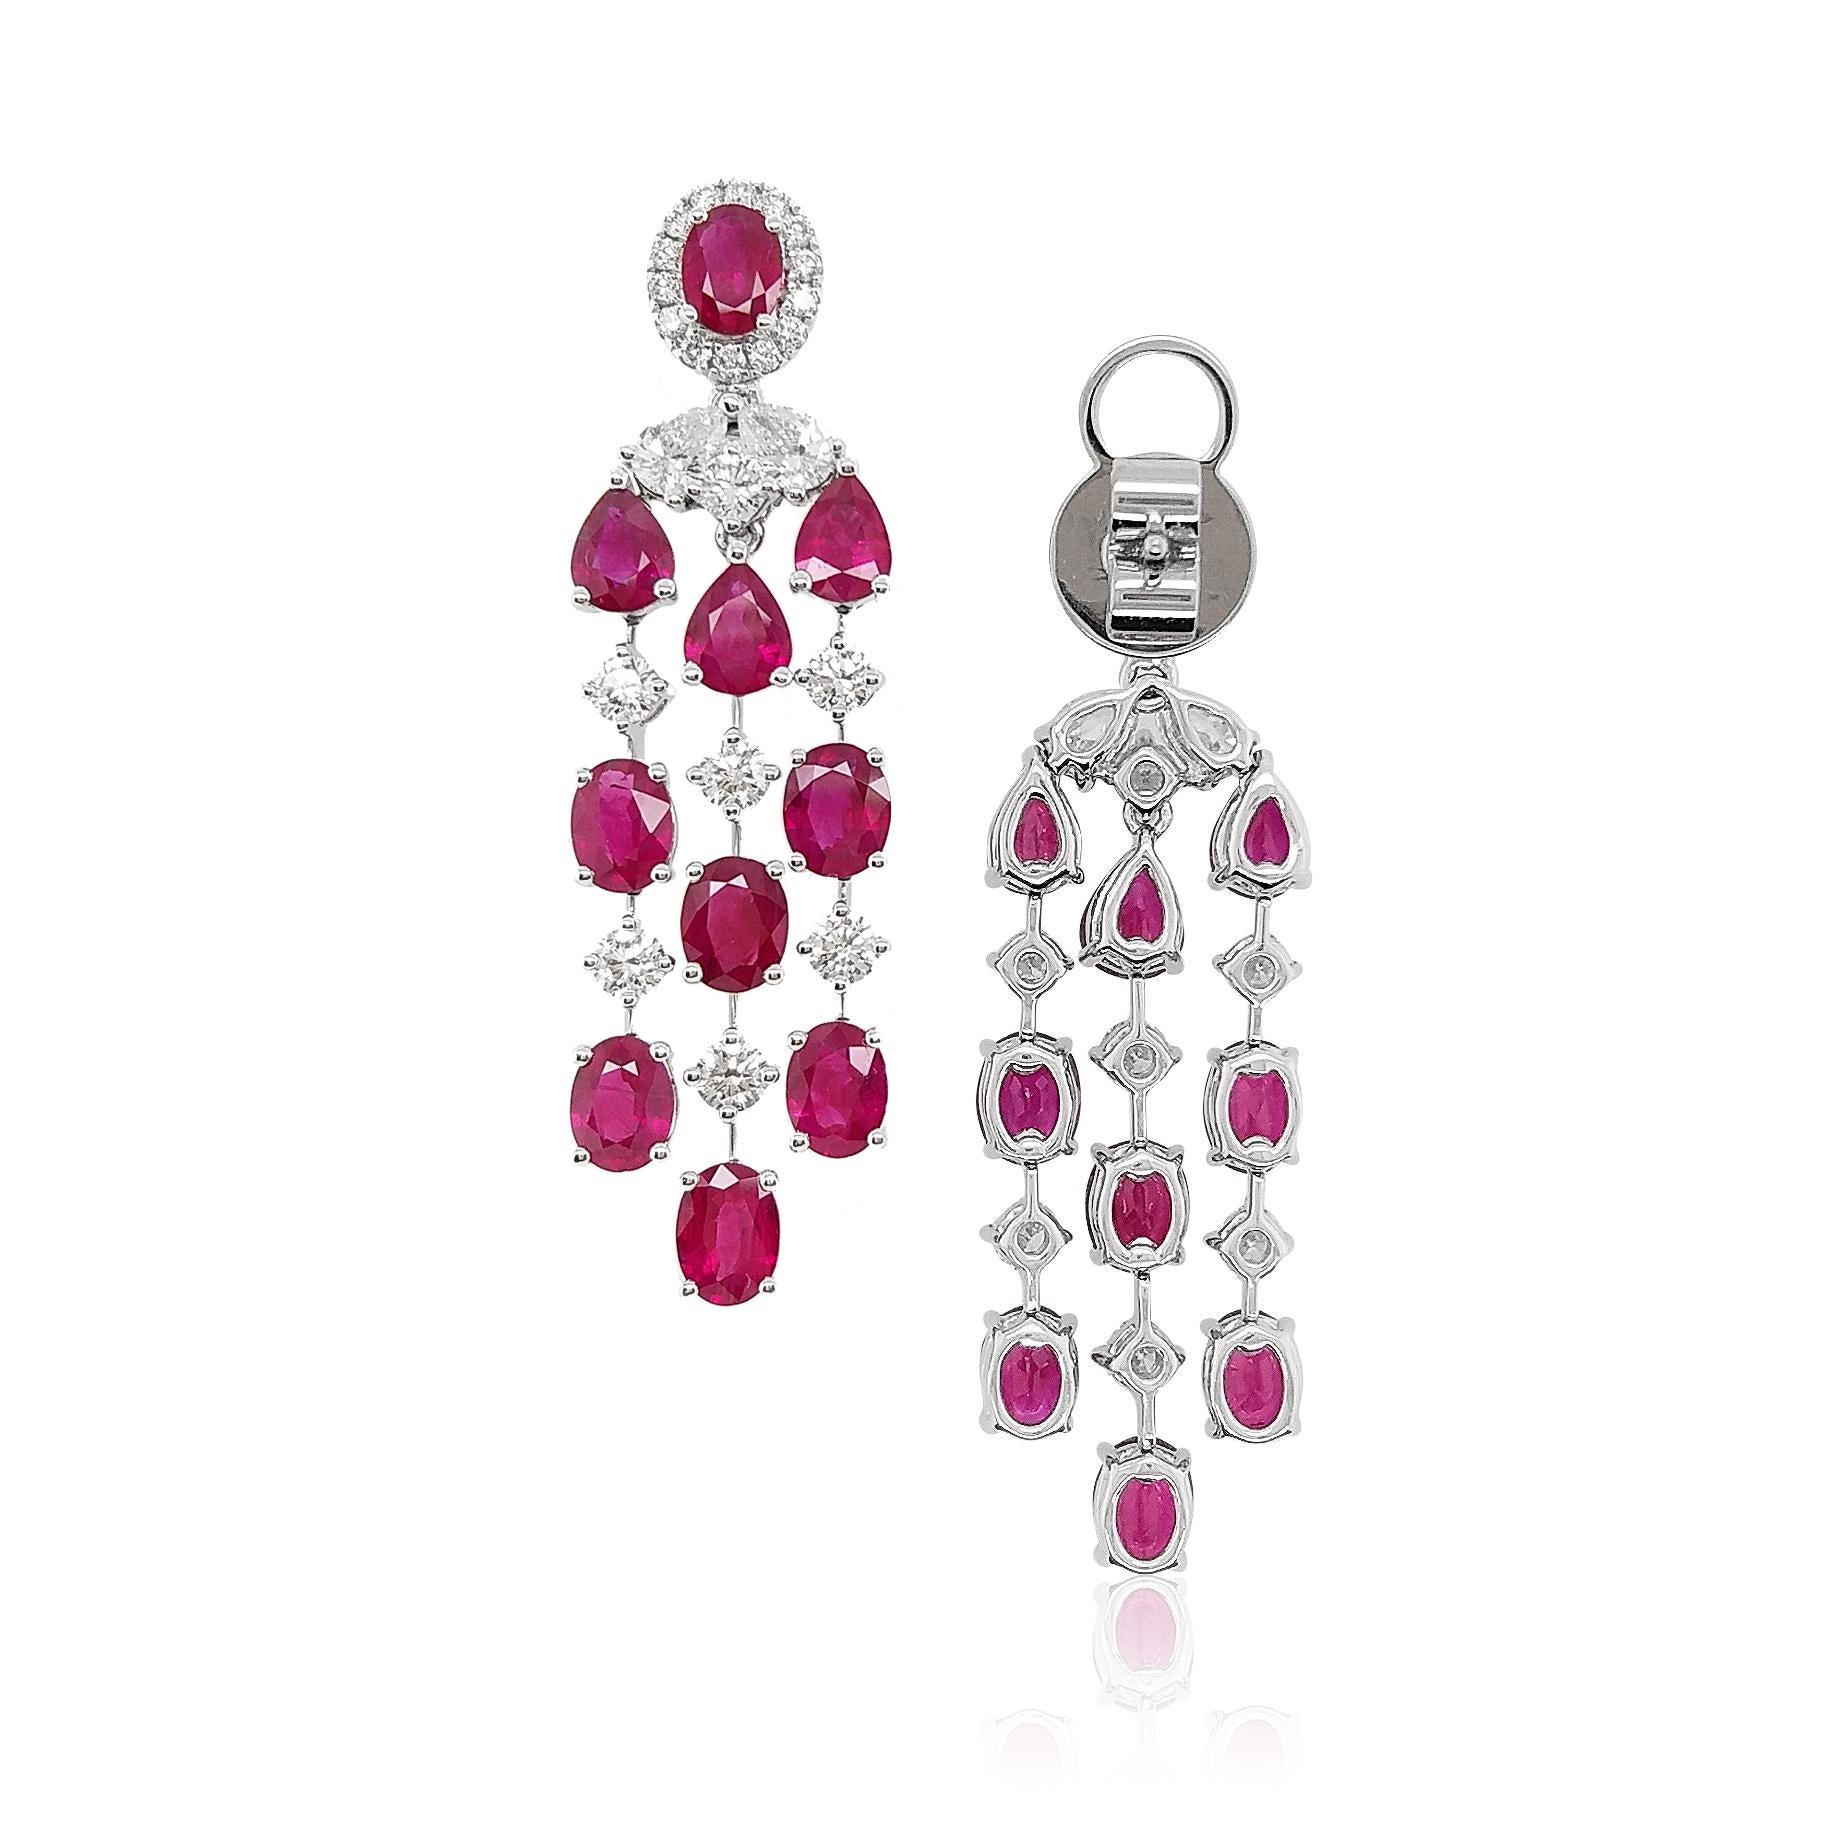 These striking earrings feature lustrous blood-red Burmese Rubies. The unique hue of the rubies is perfectly accentuated by the color of the scintillating White Diamonds from which they hang.
-	Oval shape and Pear shape Burmese Rubies total 6.36